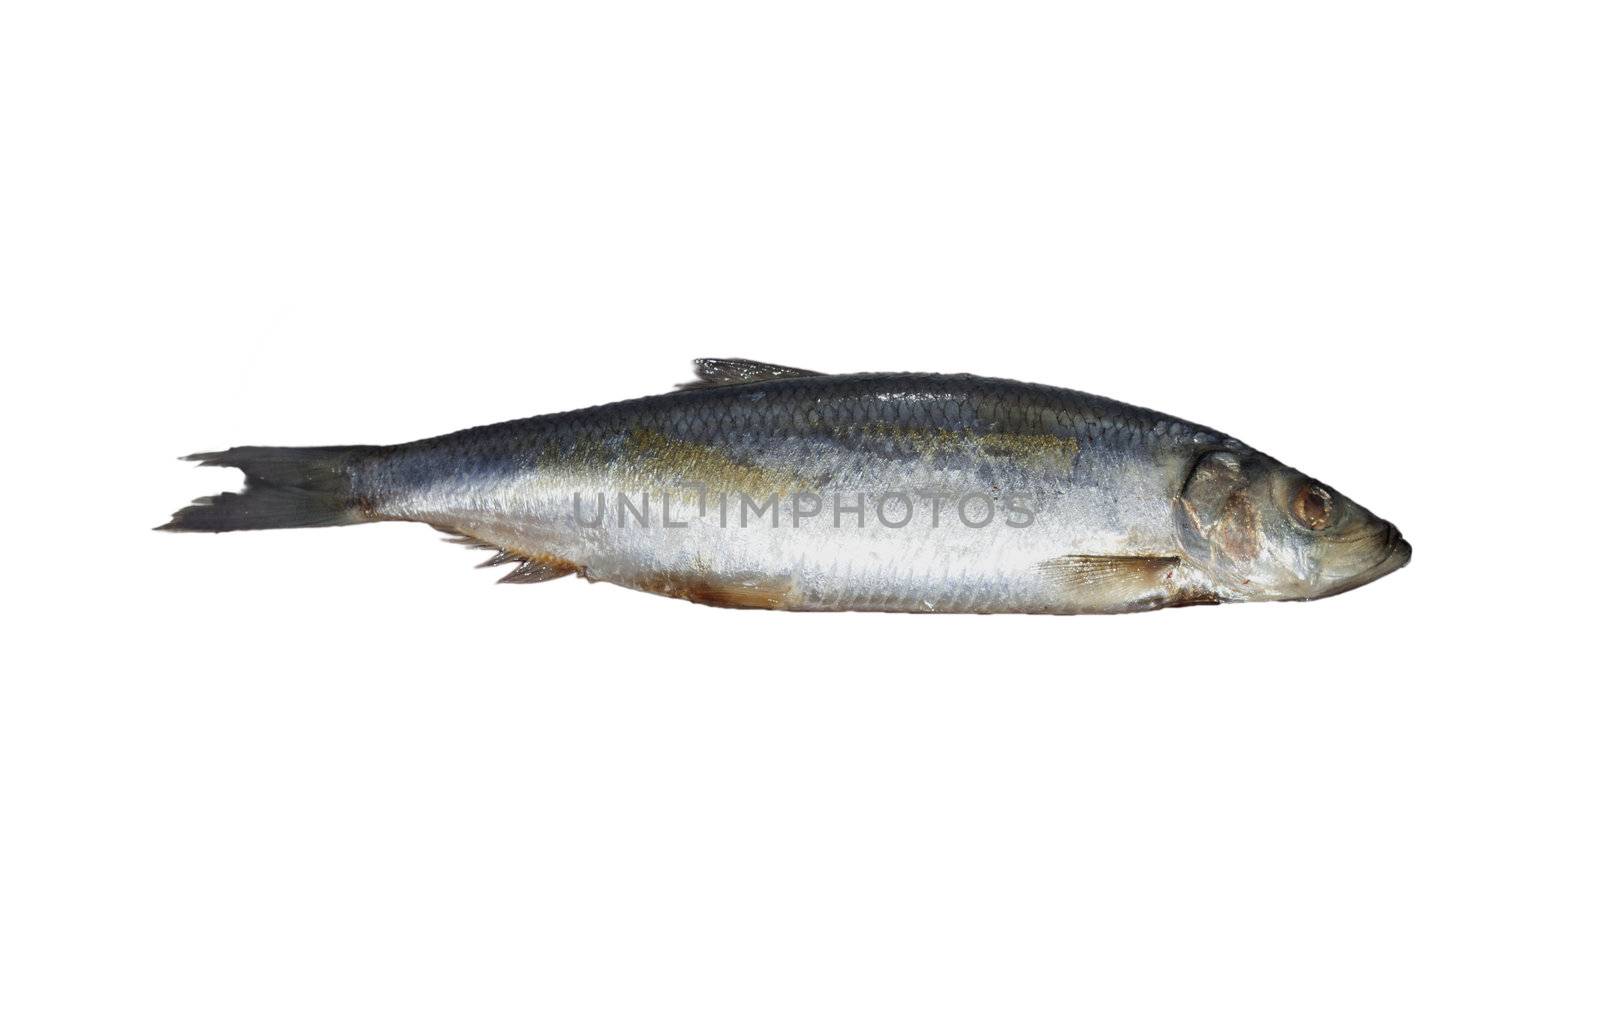 Herring. Image series of different food on white background 